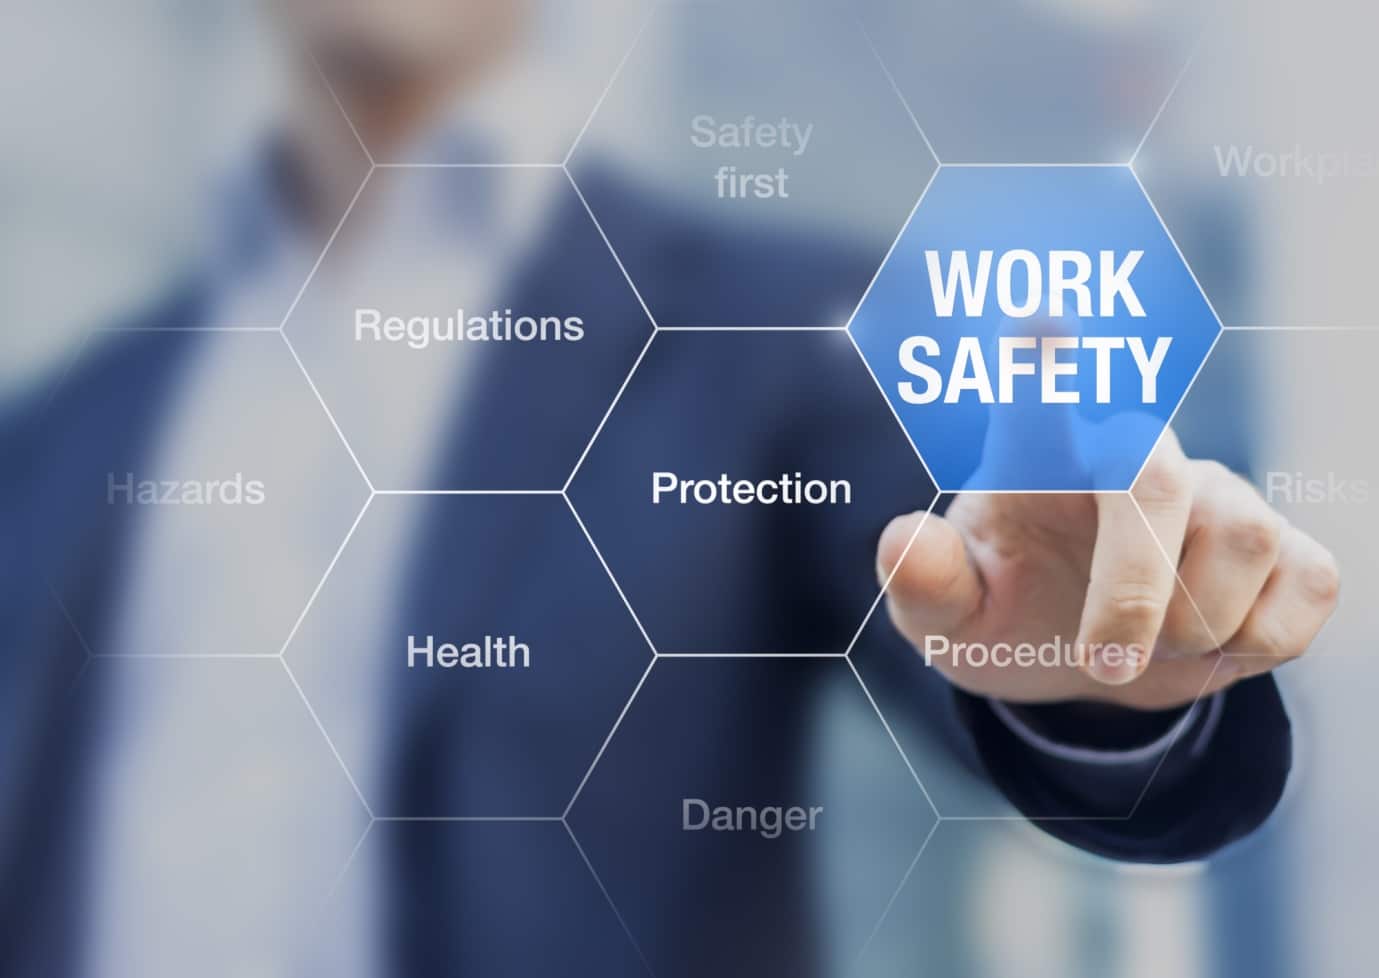 7 Tips on Building Workplace Safety Strategies for Small Businesses